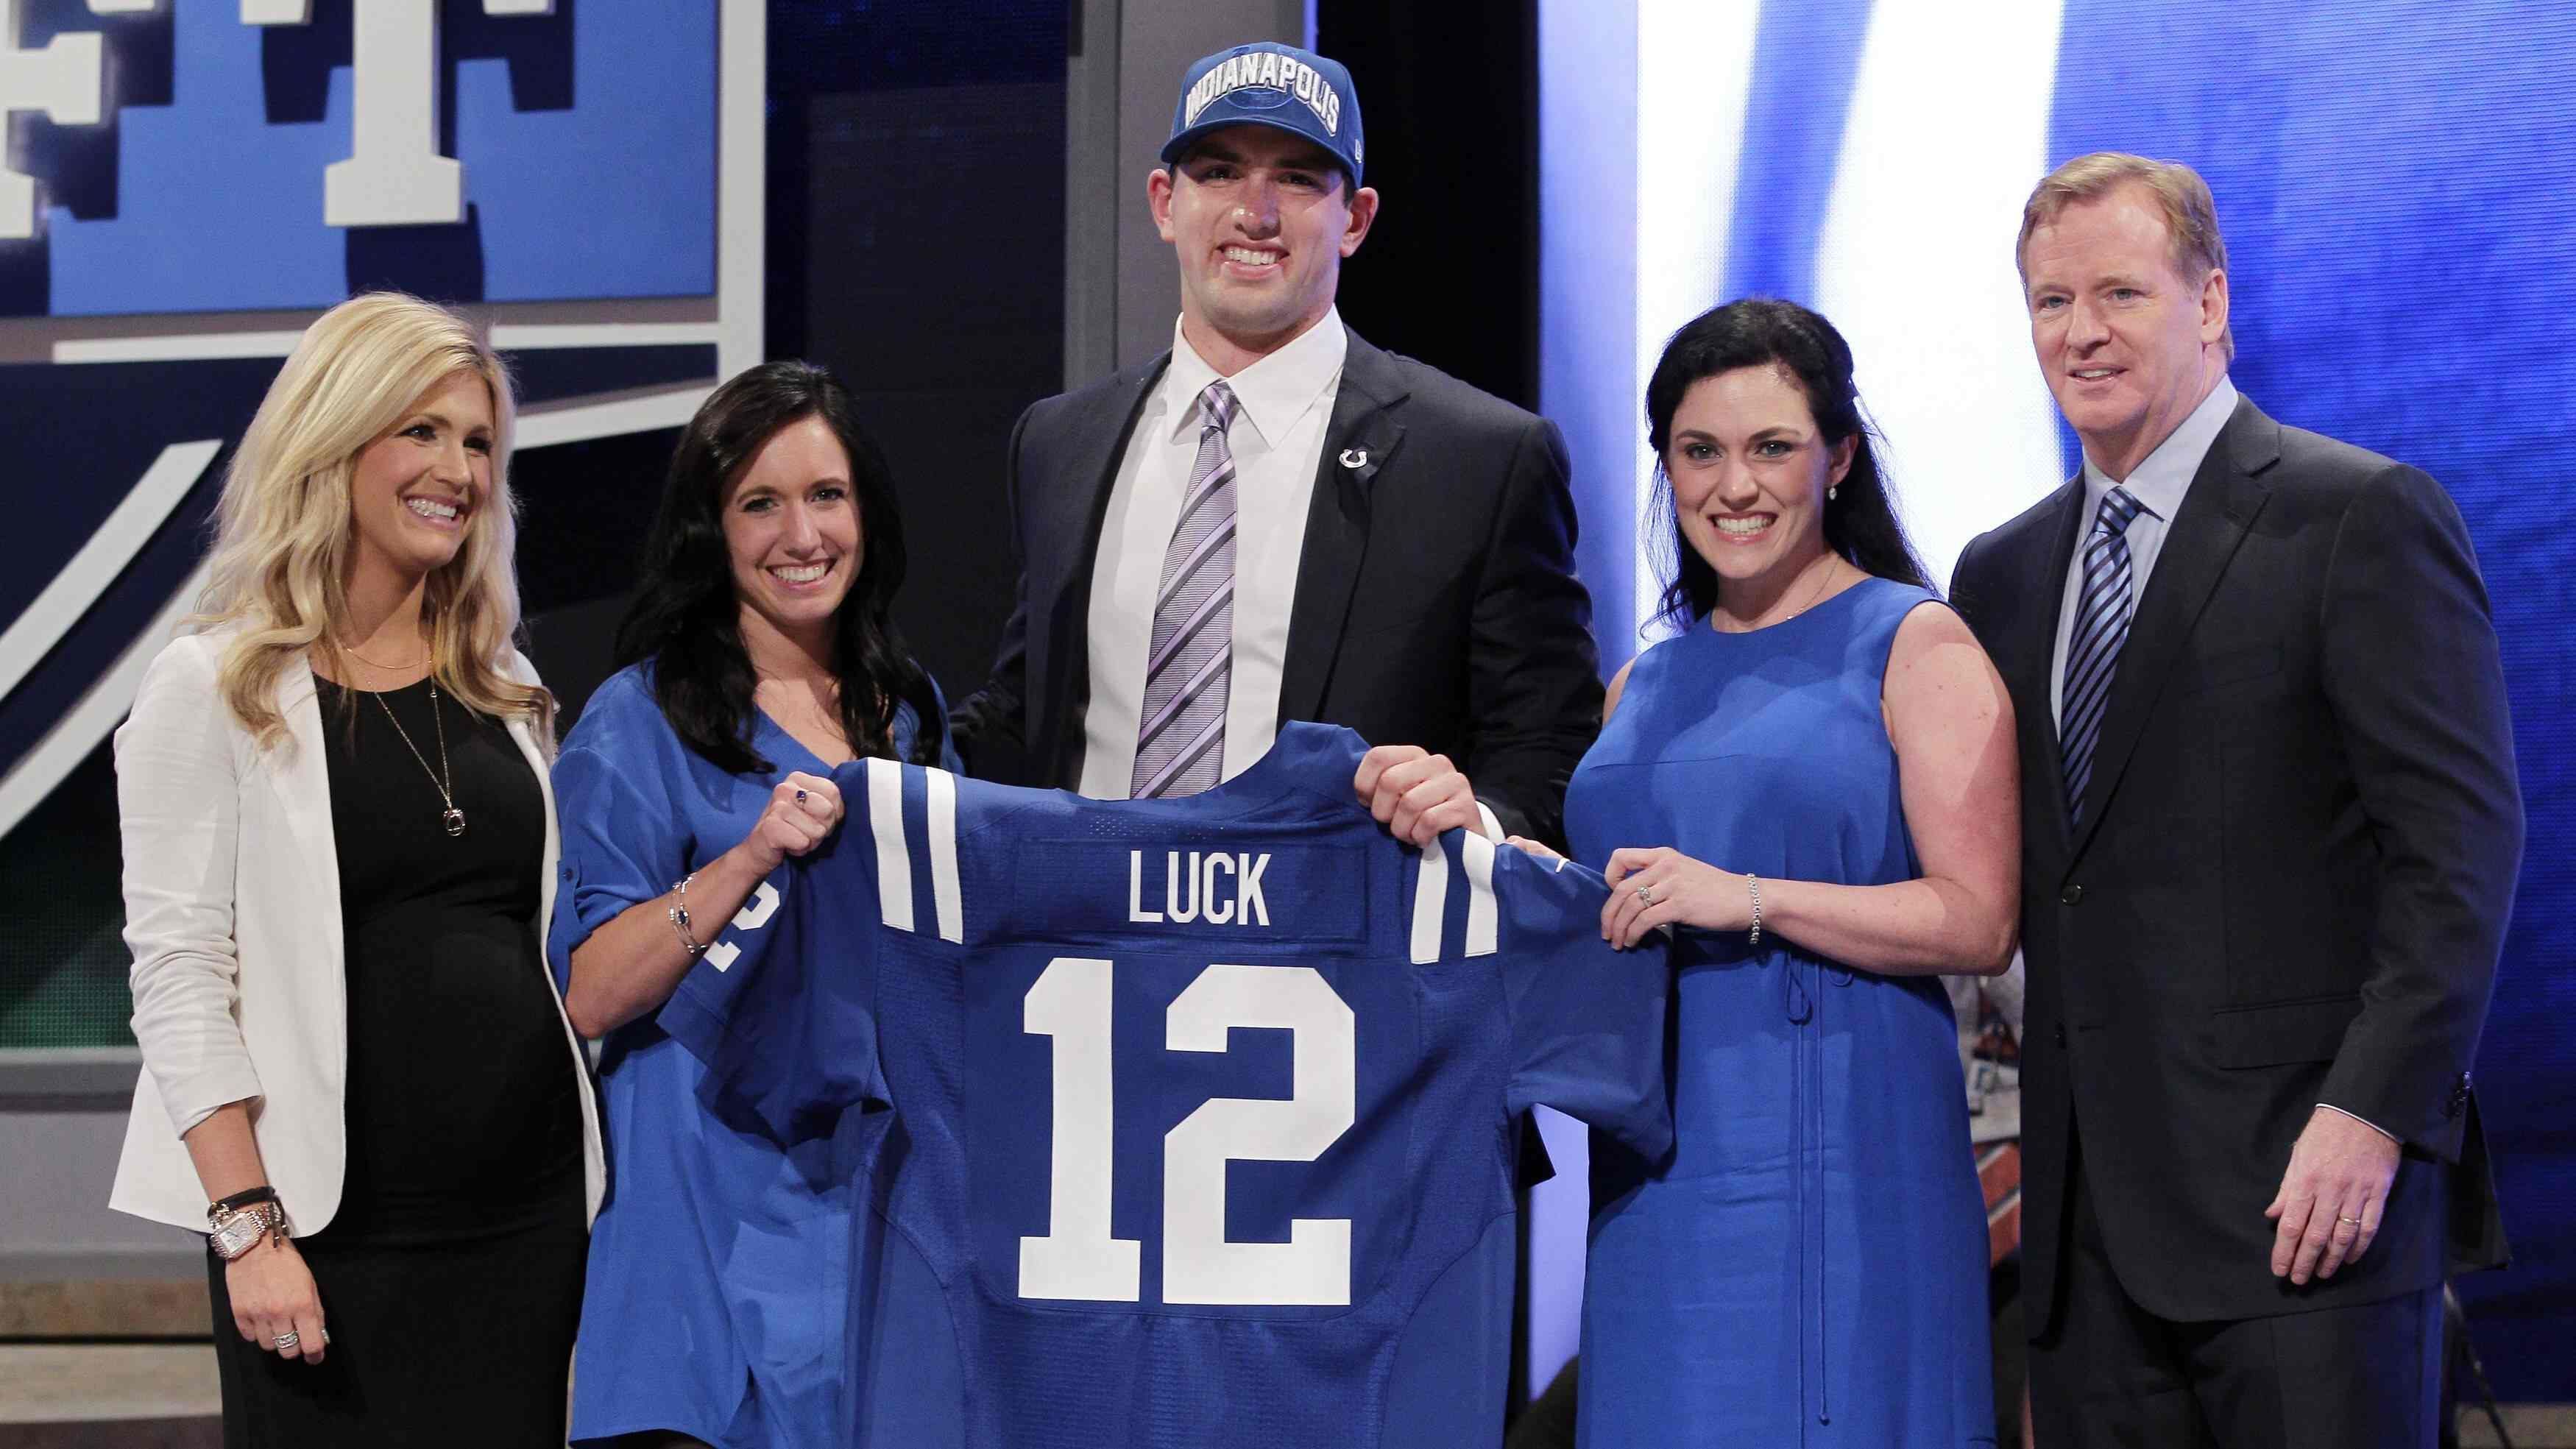 
                <strong>Andrew Luck </strong><br>
                 - Draft: 2012 an 1. Stelle von den Indianapolis Colts   - Stationen: Indianapolis Colts 2012 bis 2019   - Karriere 2019 beendet 
              